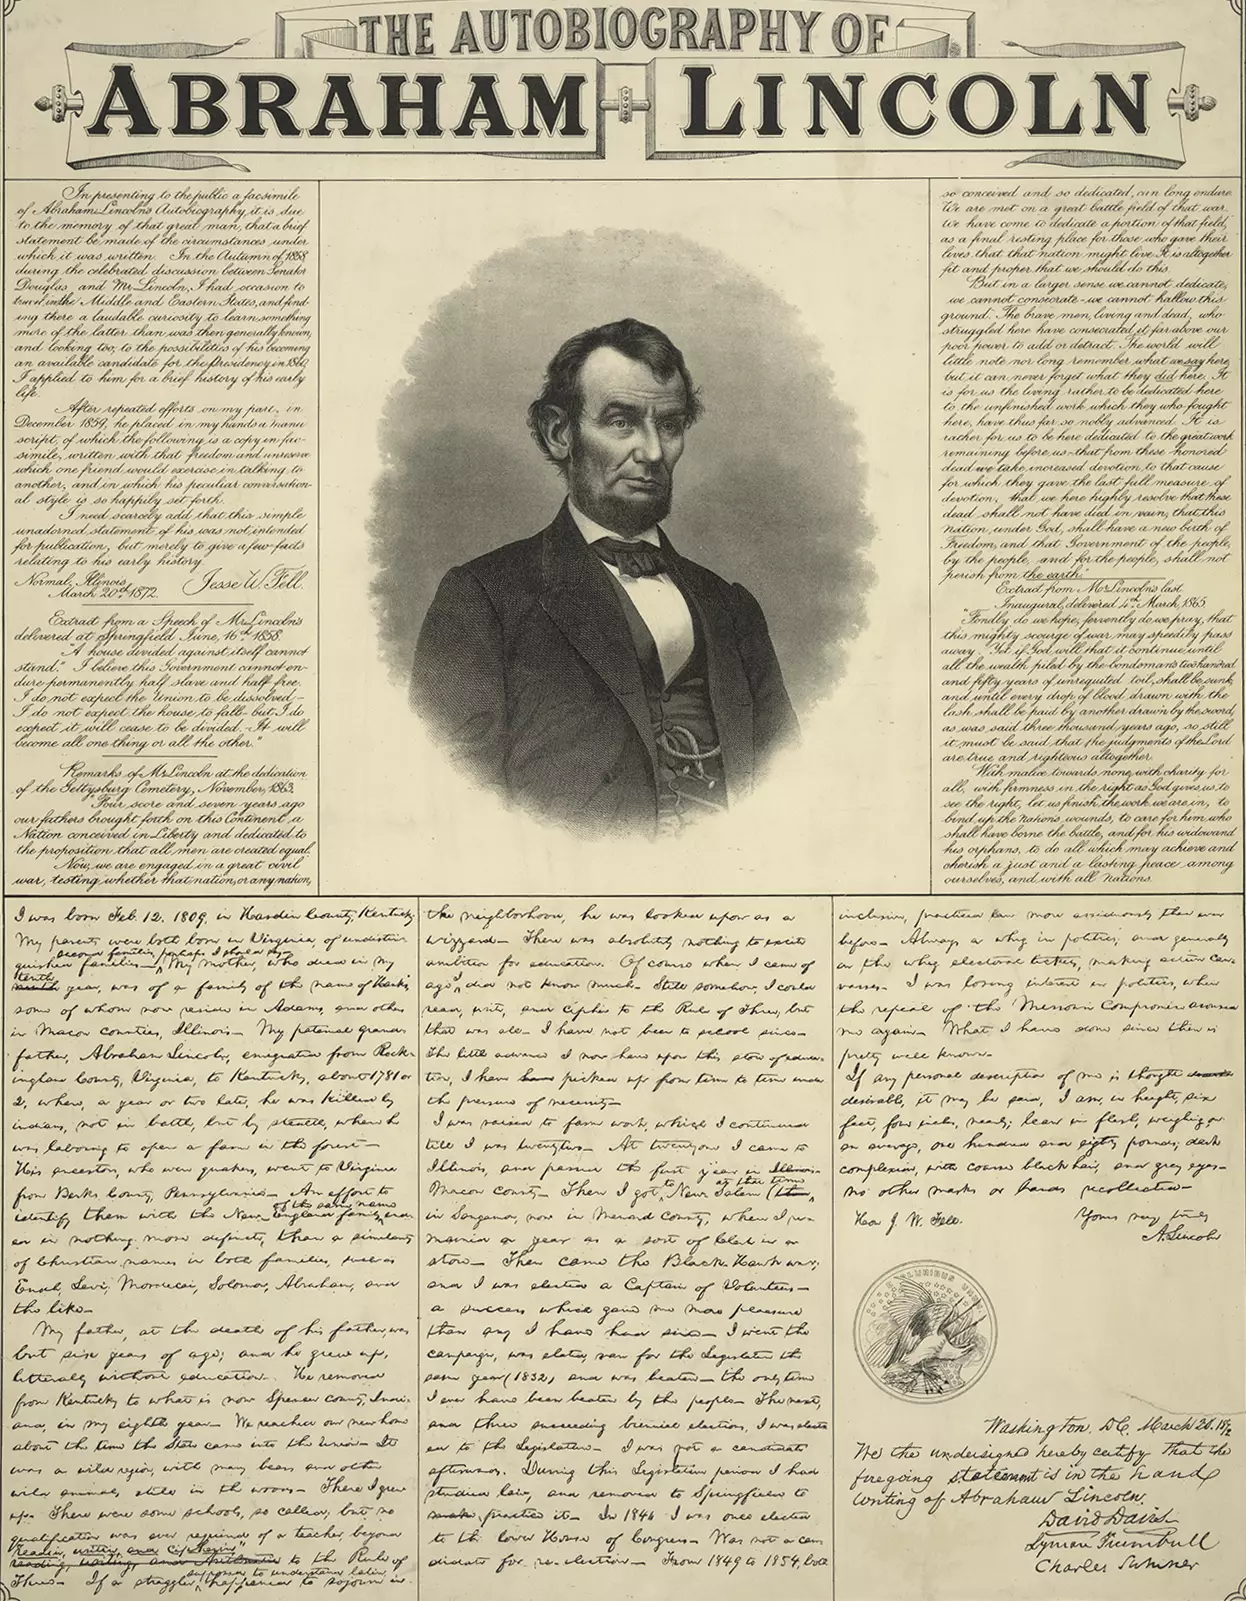 Newspaper clipping titled the autobiography of abraham lincoln. Text takes up entire newspaper page and details lincoln's upbringing life to point at which he announces his candidacy.